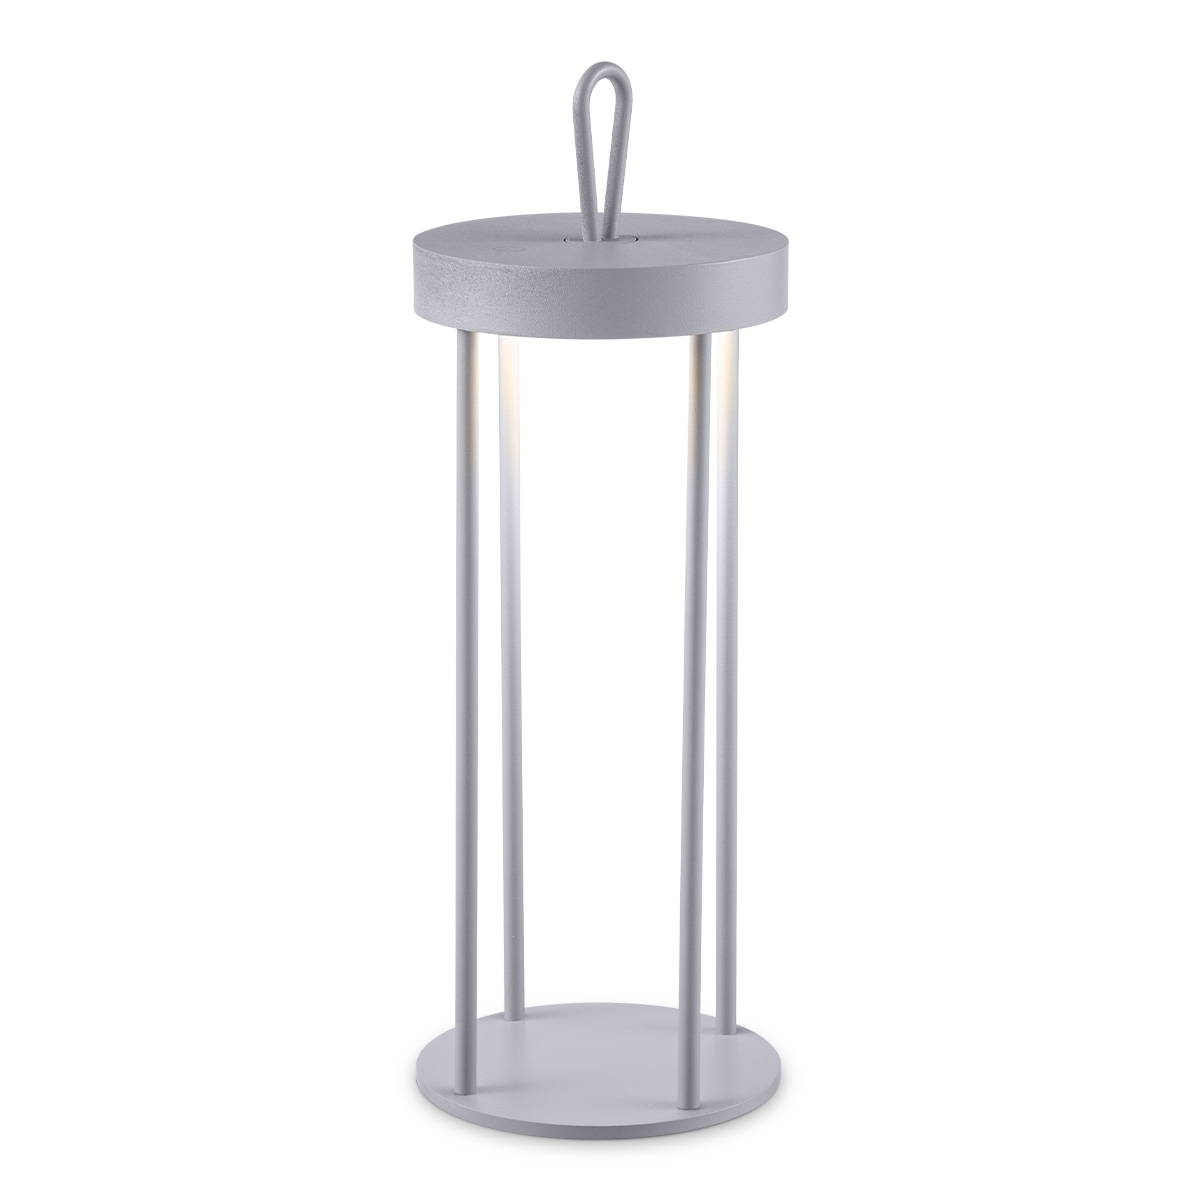 Tangla lighting - TLT7654-01GY - LED table lamp - outdoor lighting - rechargeable plastic and metal - touch dimmer - grey - pavilion